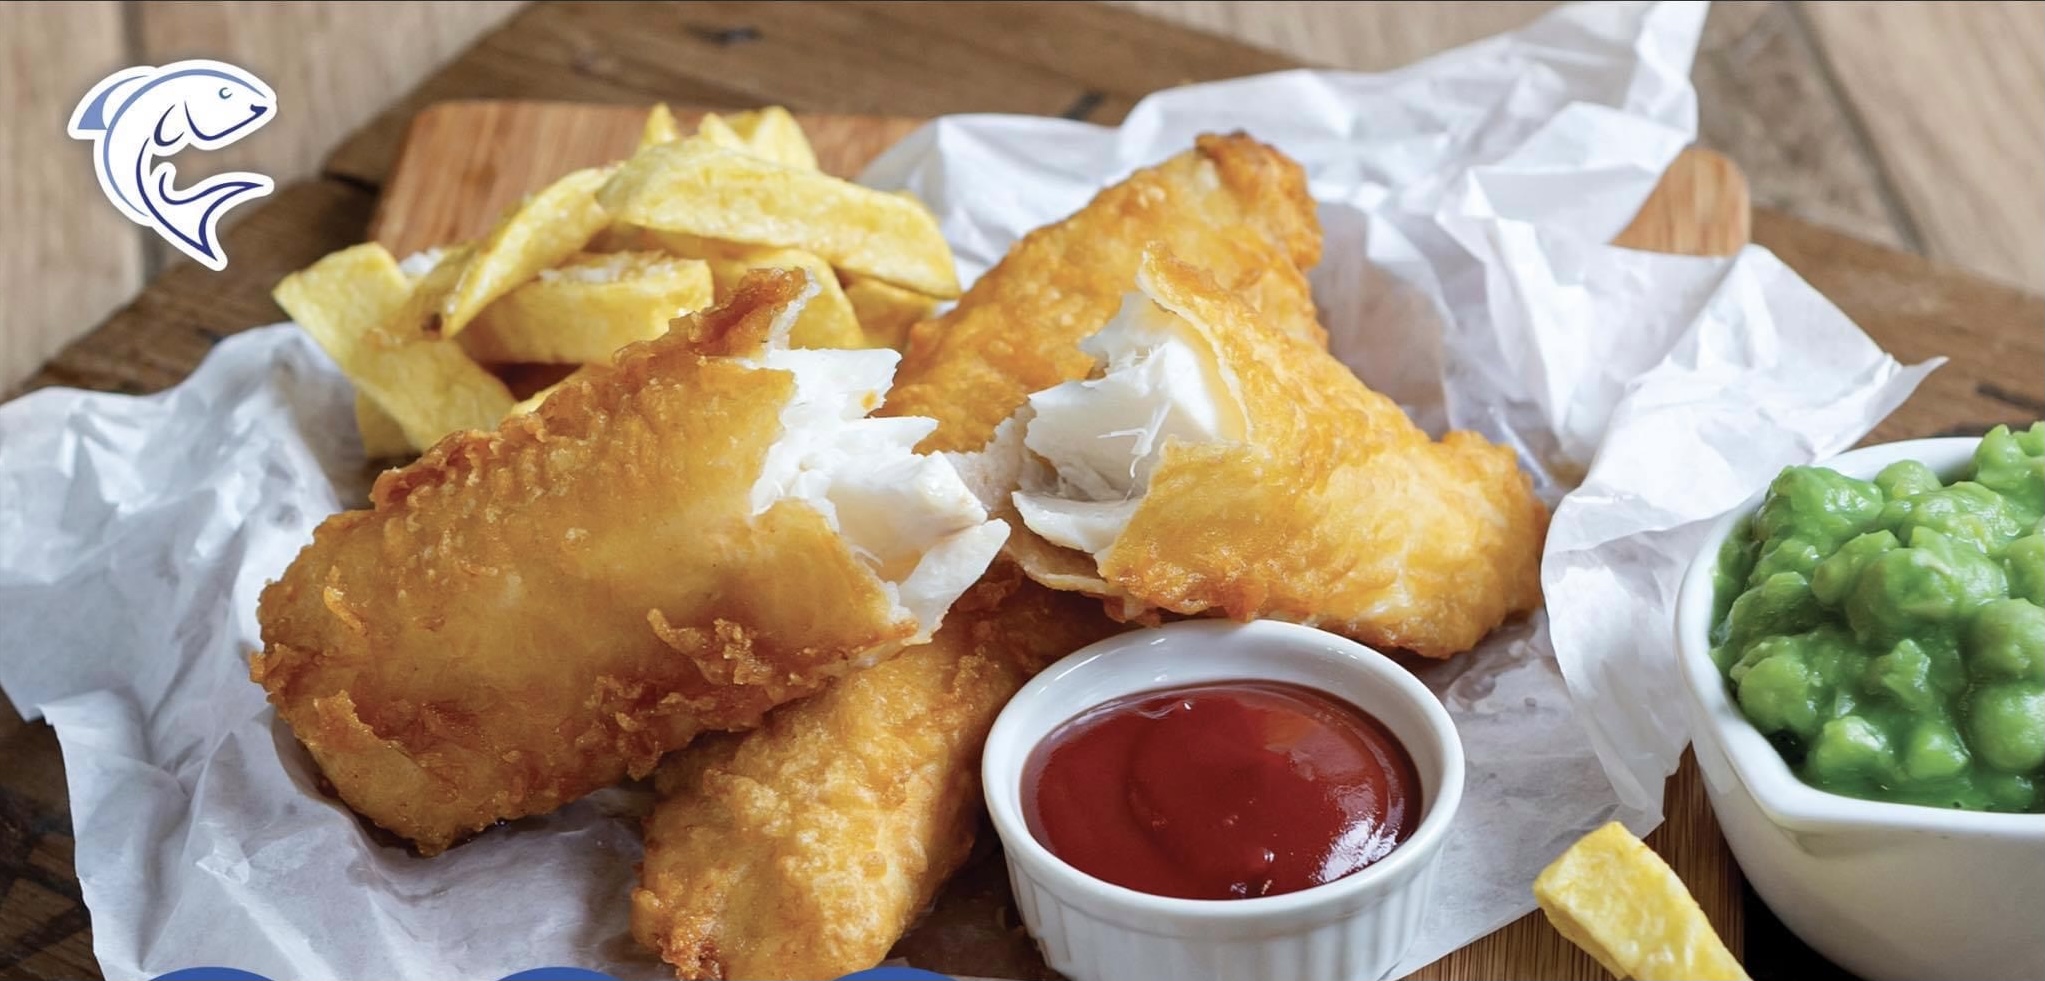 NEWS | Herefordshire Fish & Chip Shop named as one of the best in the UK